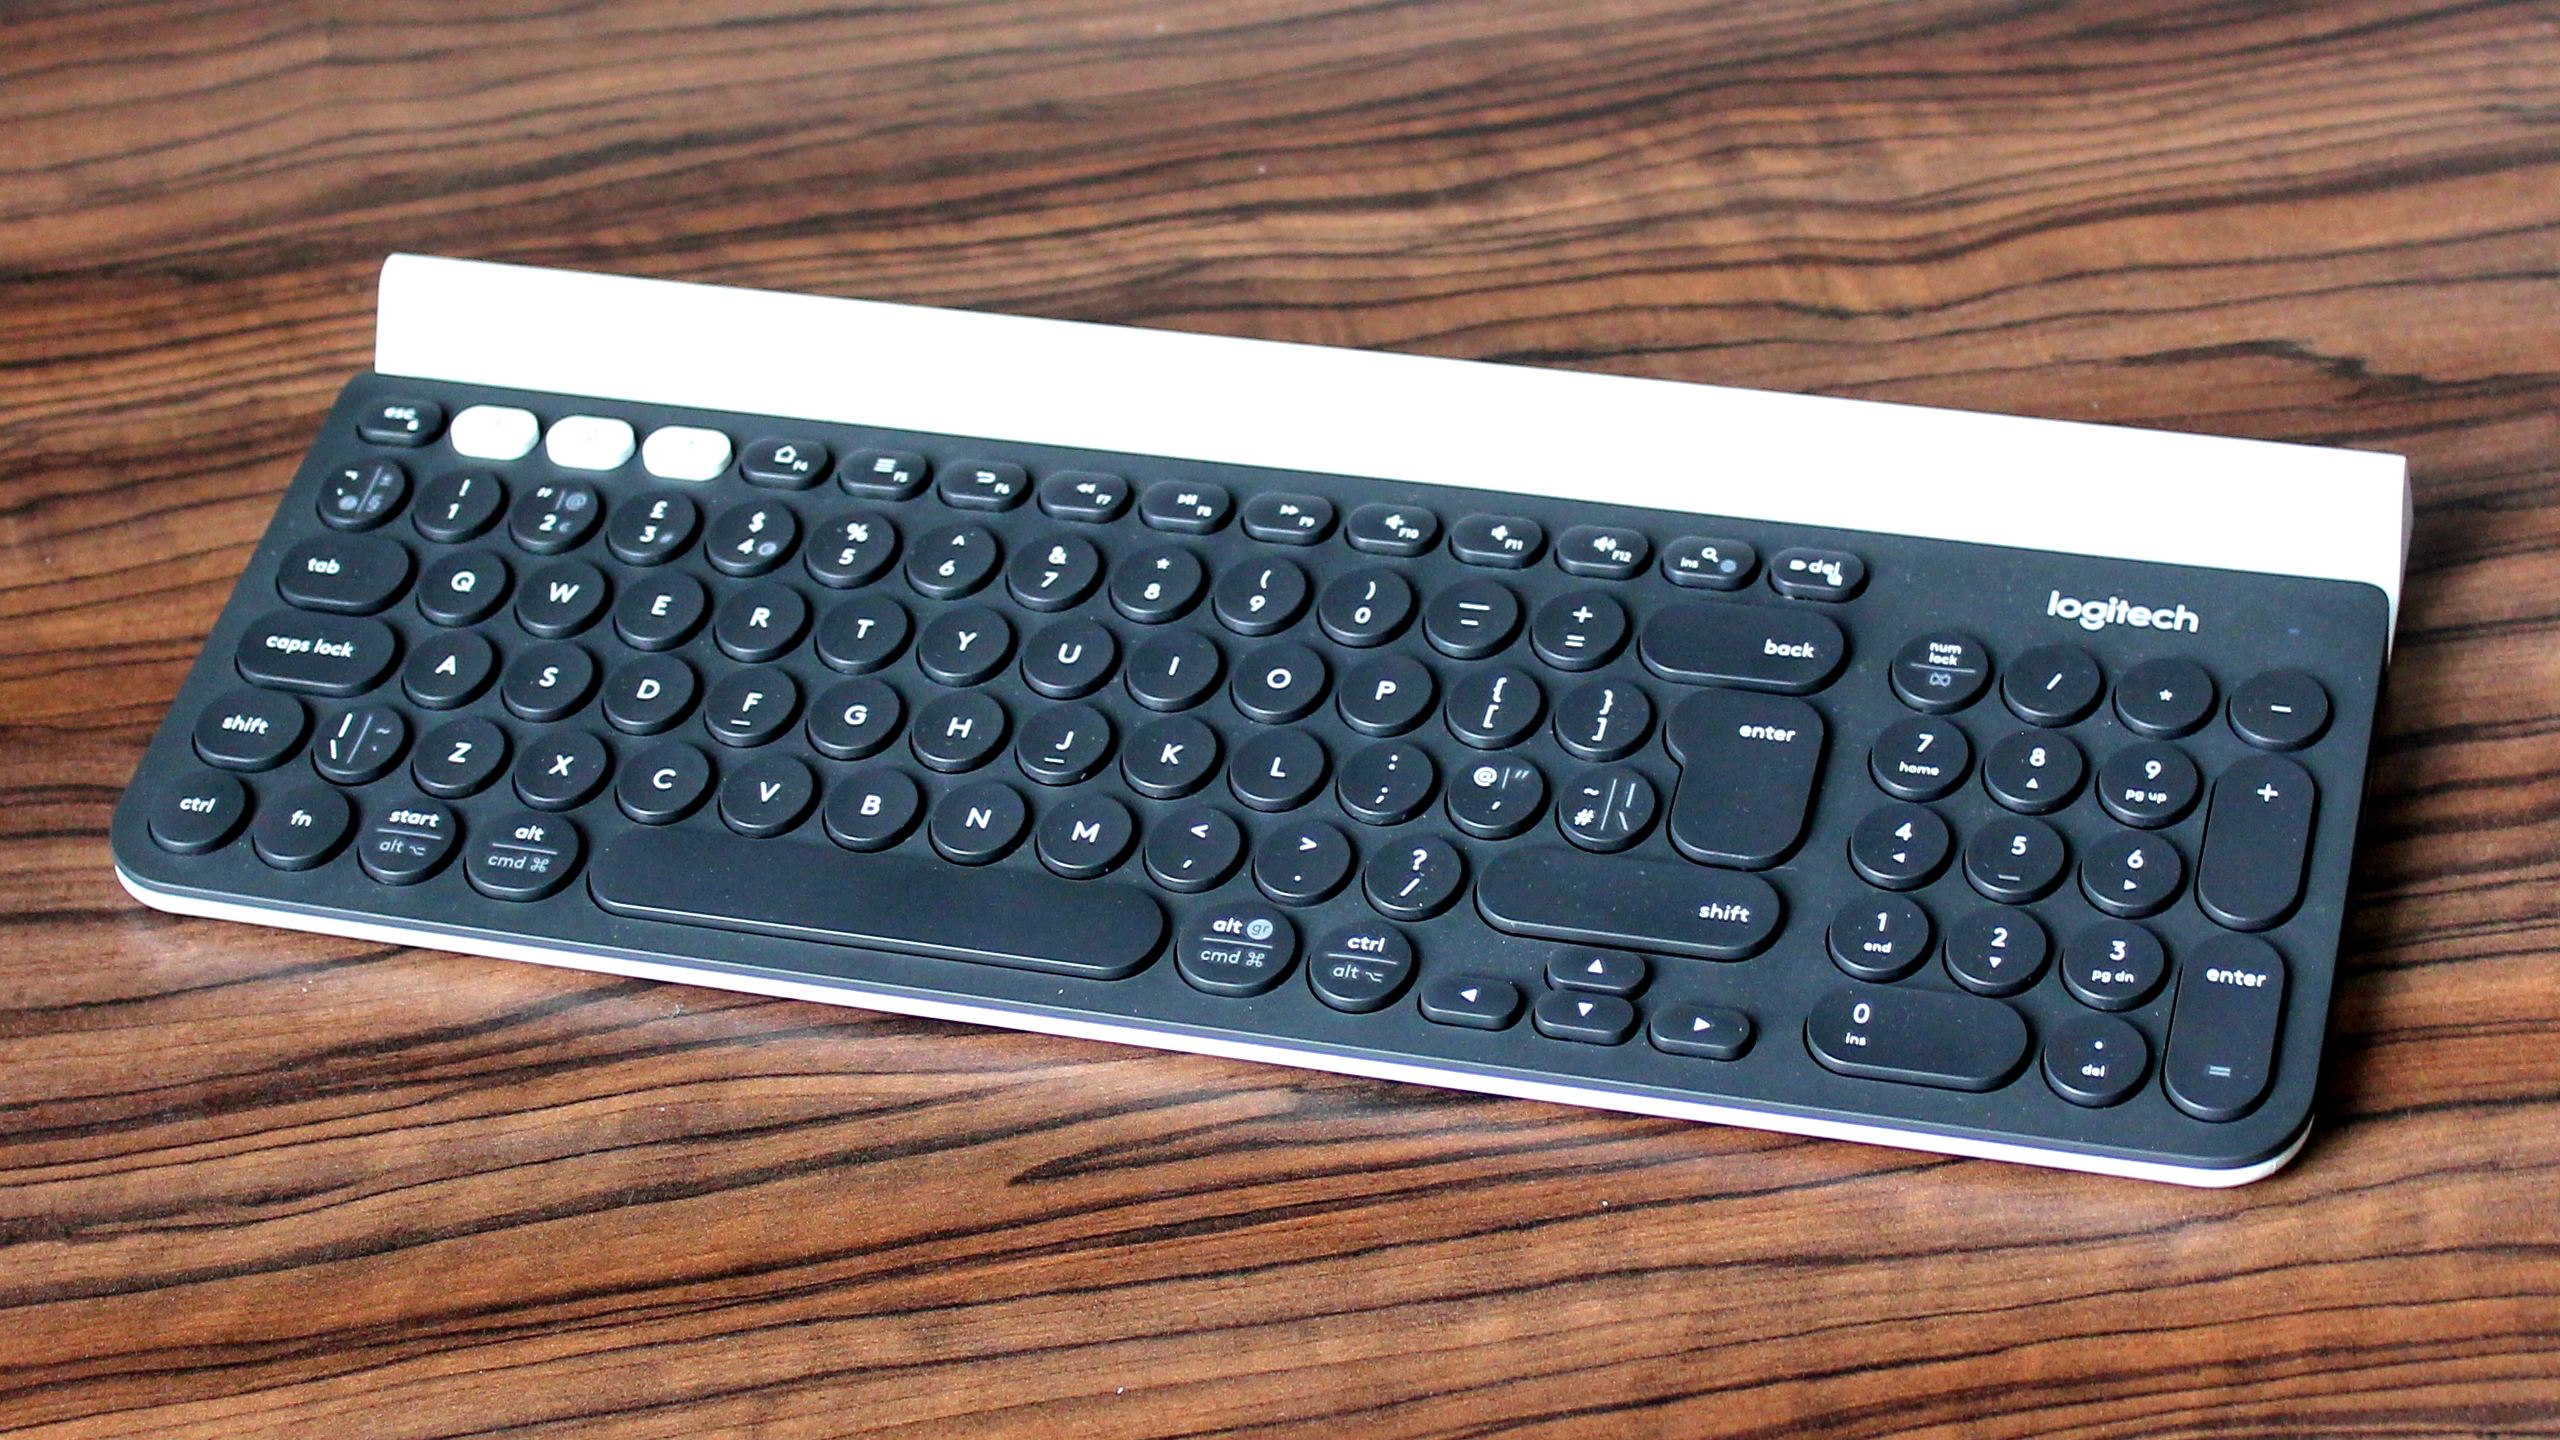 The Best Keyboards Of 2019 Top 10 Keyboards Compared Photo